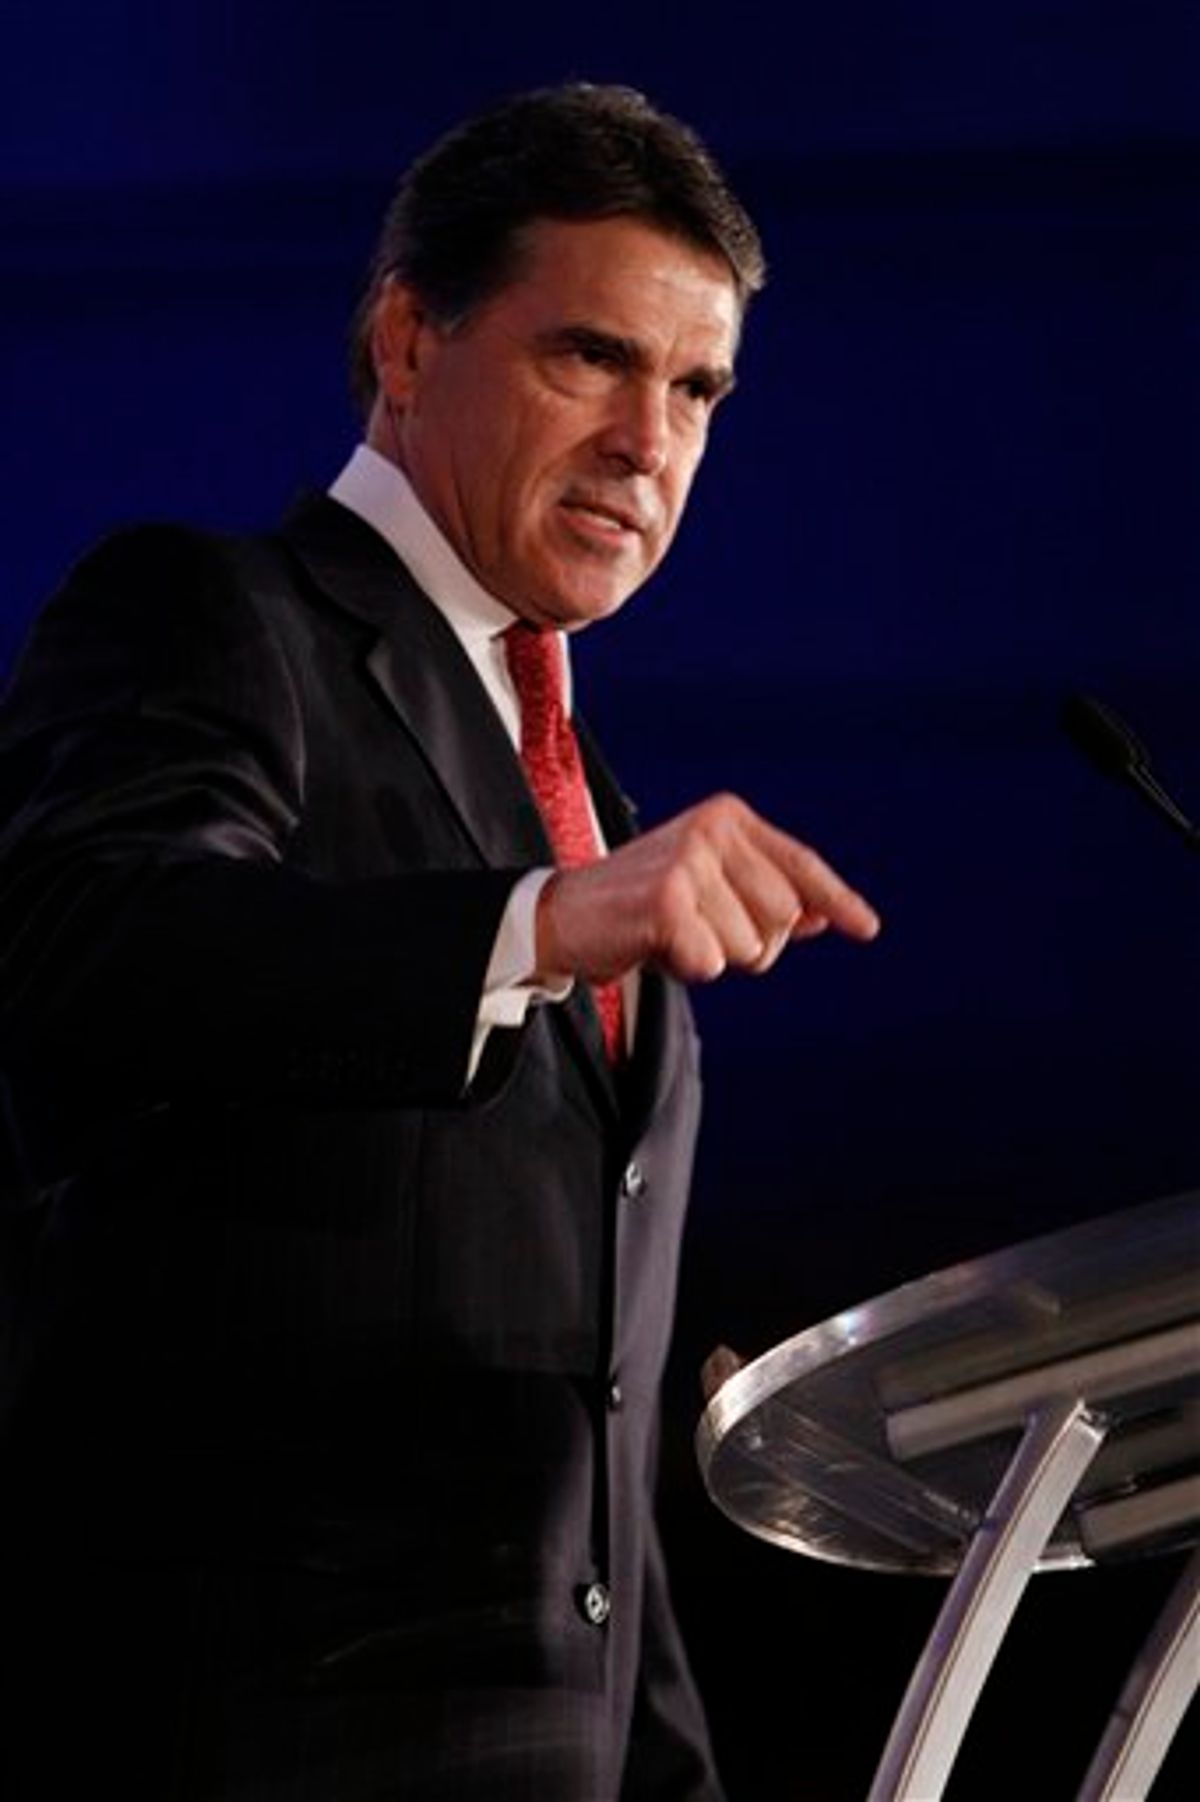 FILE - In this June 18, 2011 file photo, Texas Gov. Rick Perry speaks at the Republican Leadership Conference in New Orleans. If Perry decides to run for president, he'll attack from the Republican Party's right flank, as he would be among the GOP field's most conservative candidates. (AP Photo/Patrick Semansky, File) (AP)